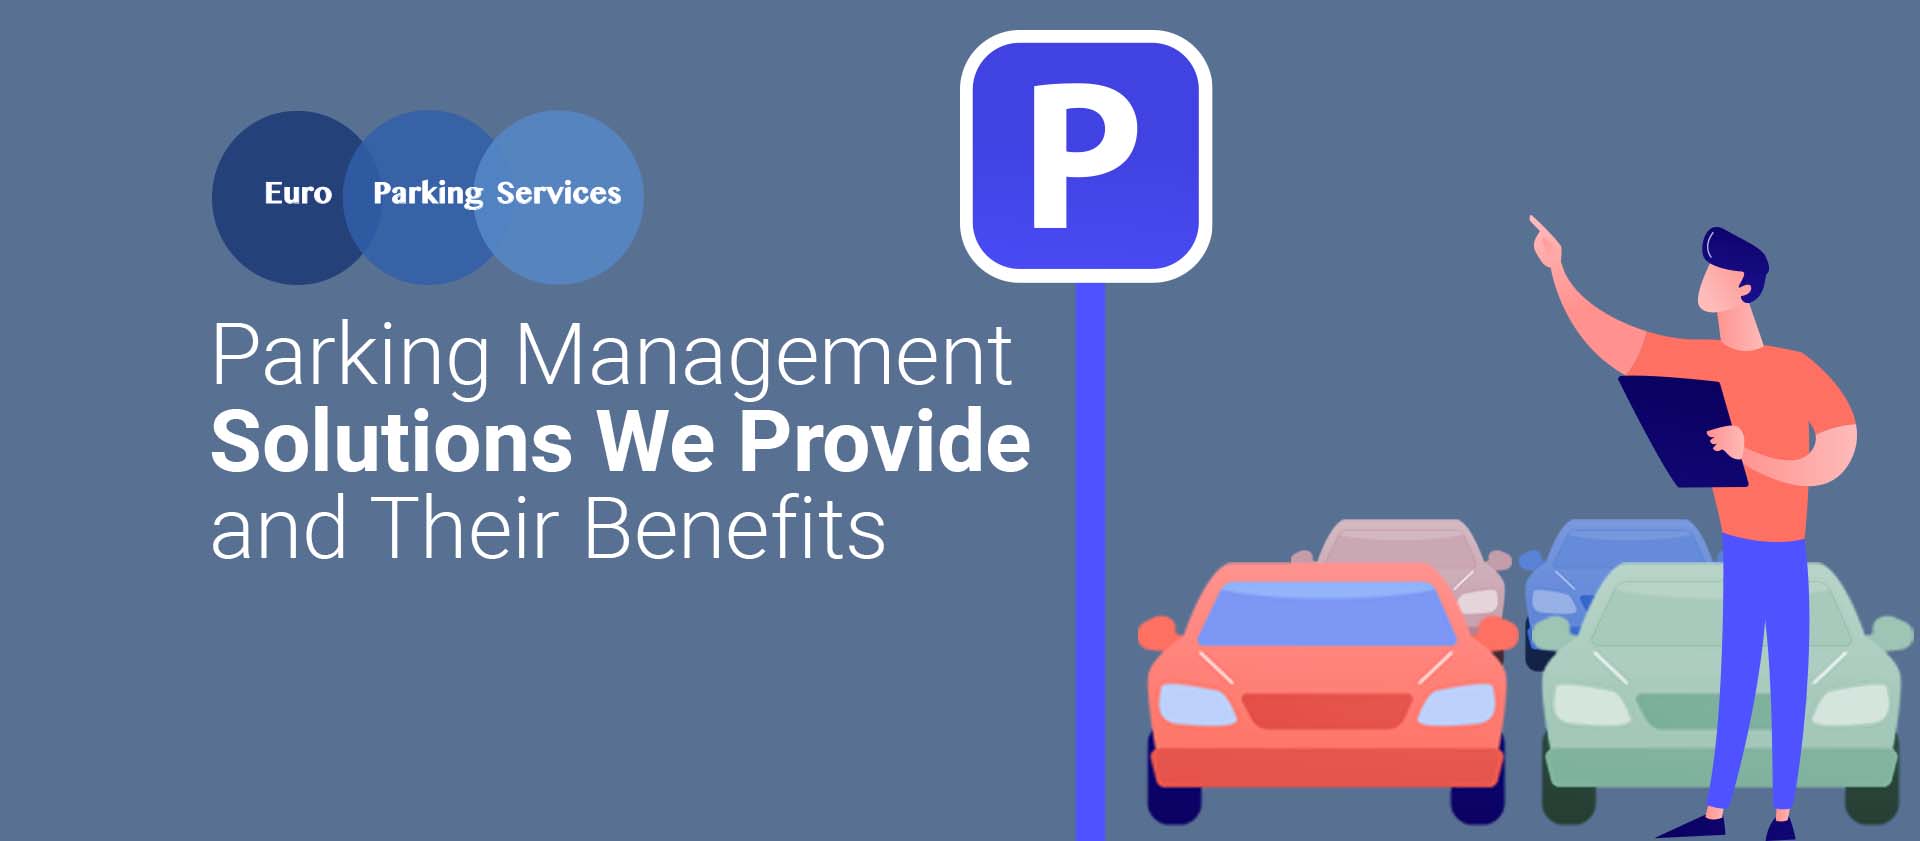 Parking management solutions and their benefits